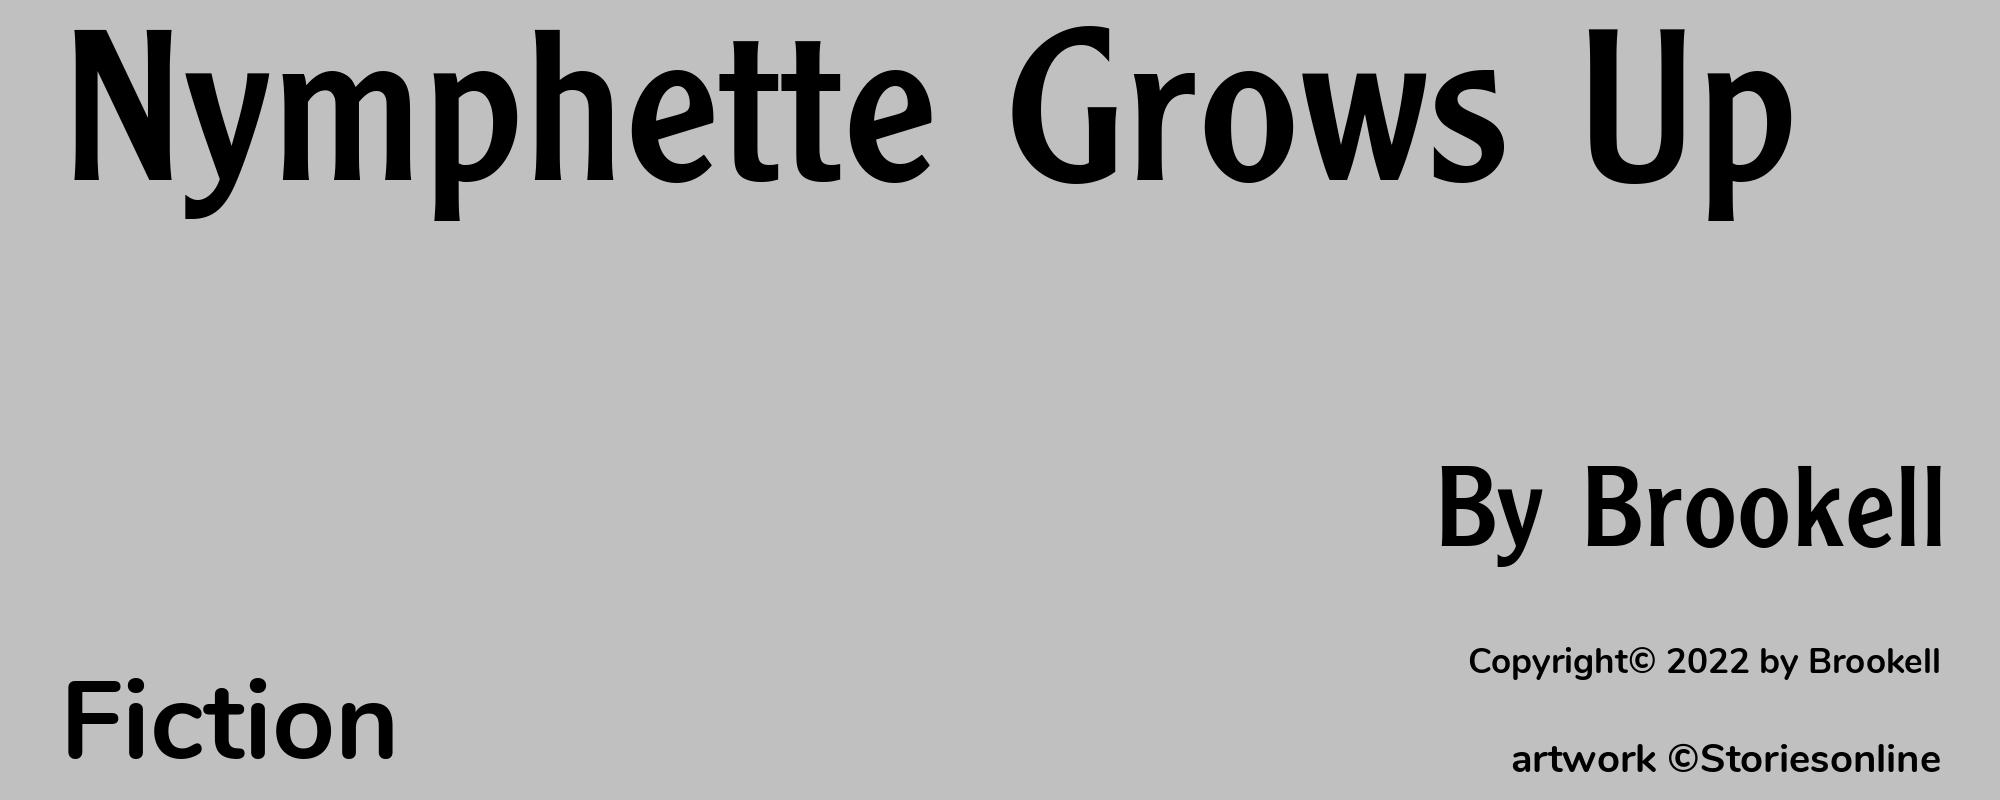 Nymphette Grows Up - Cover